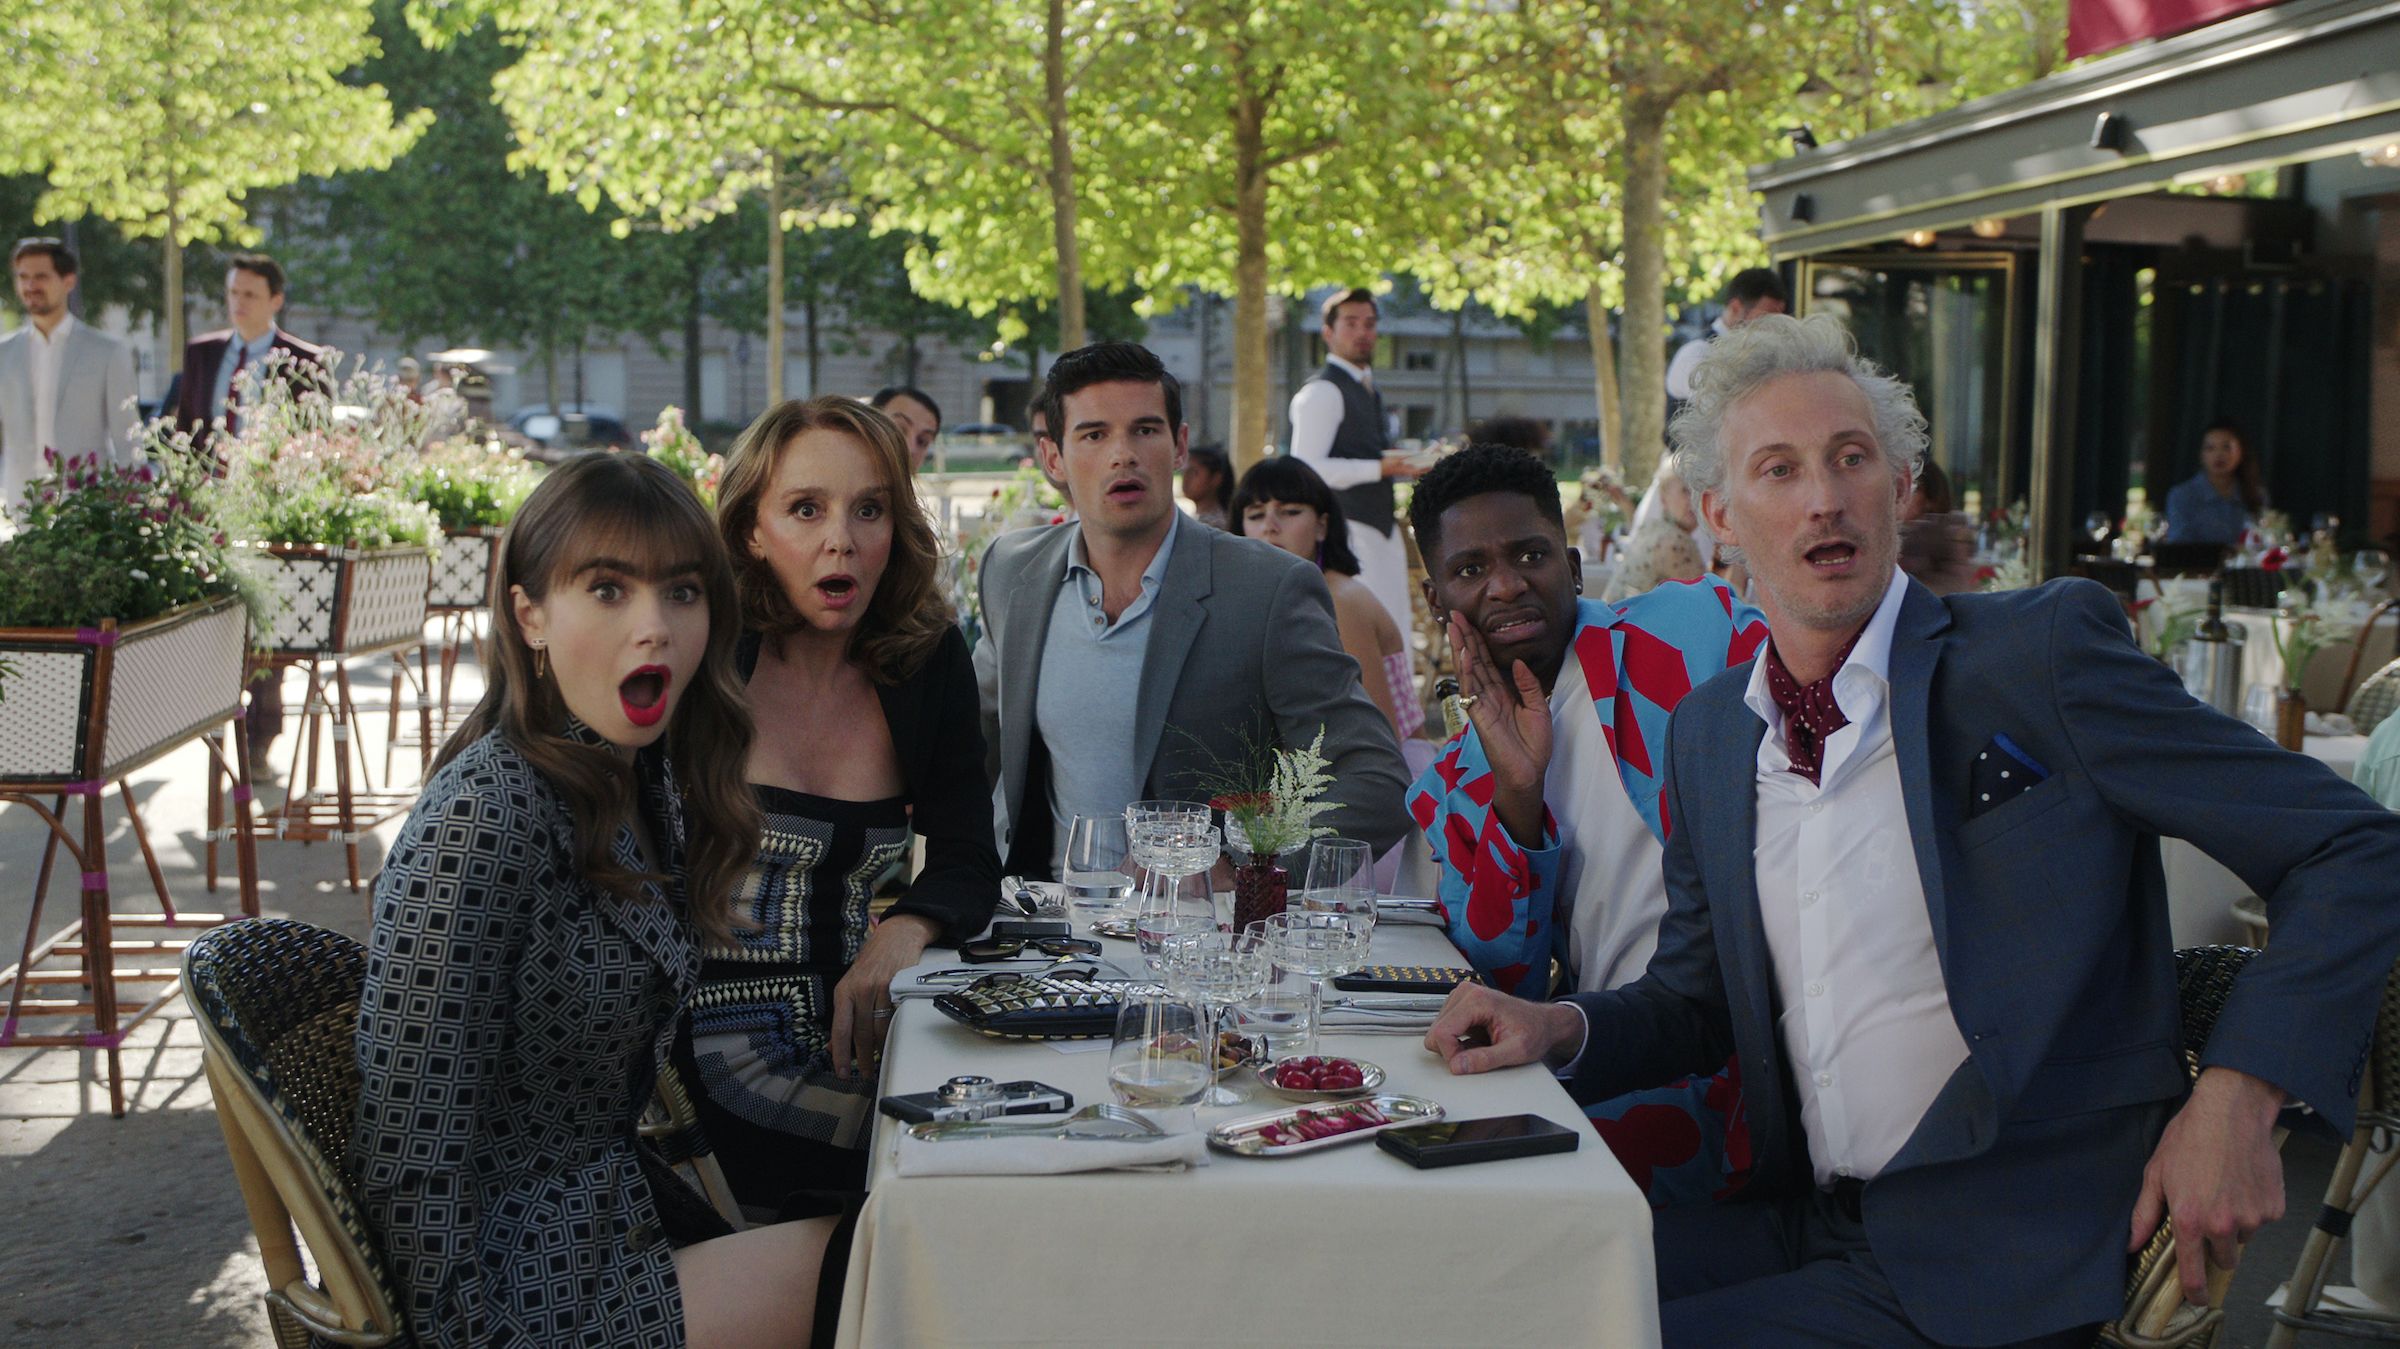 Who Is Paul Forman from Emily in Paris Season 3?